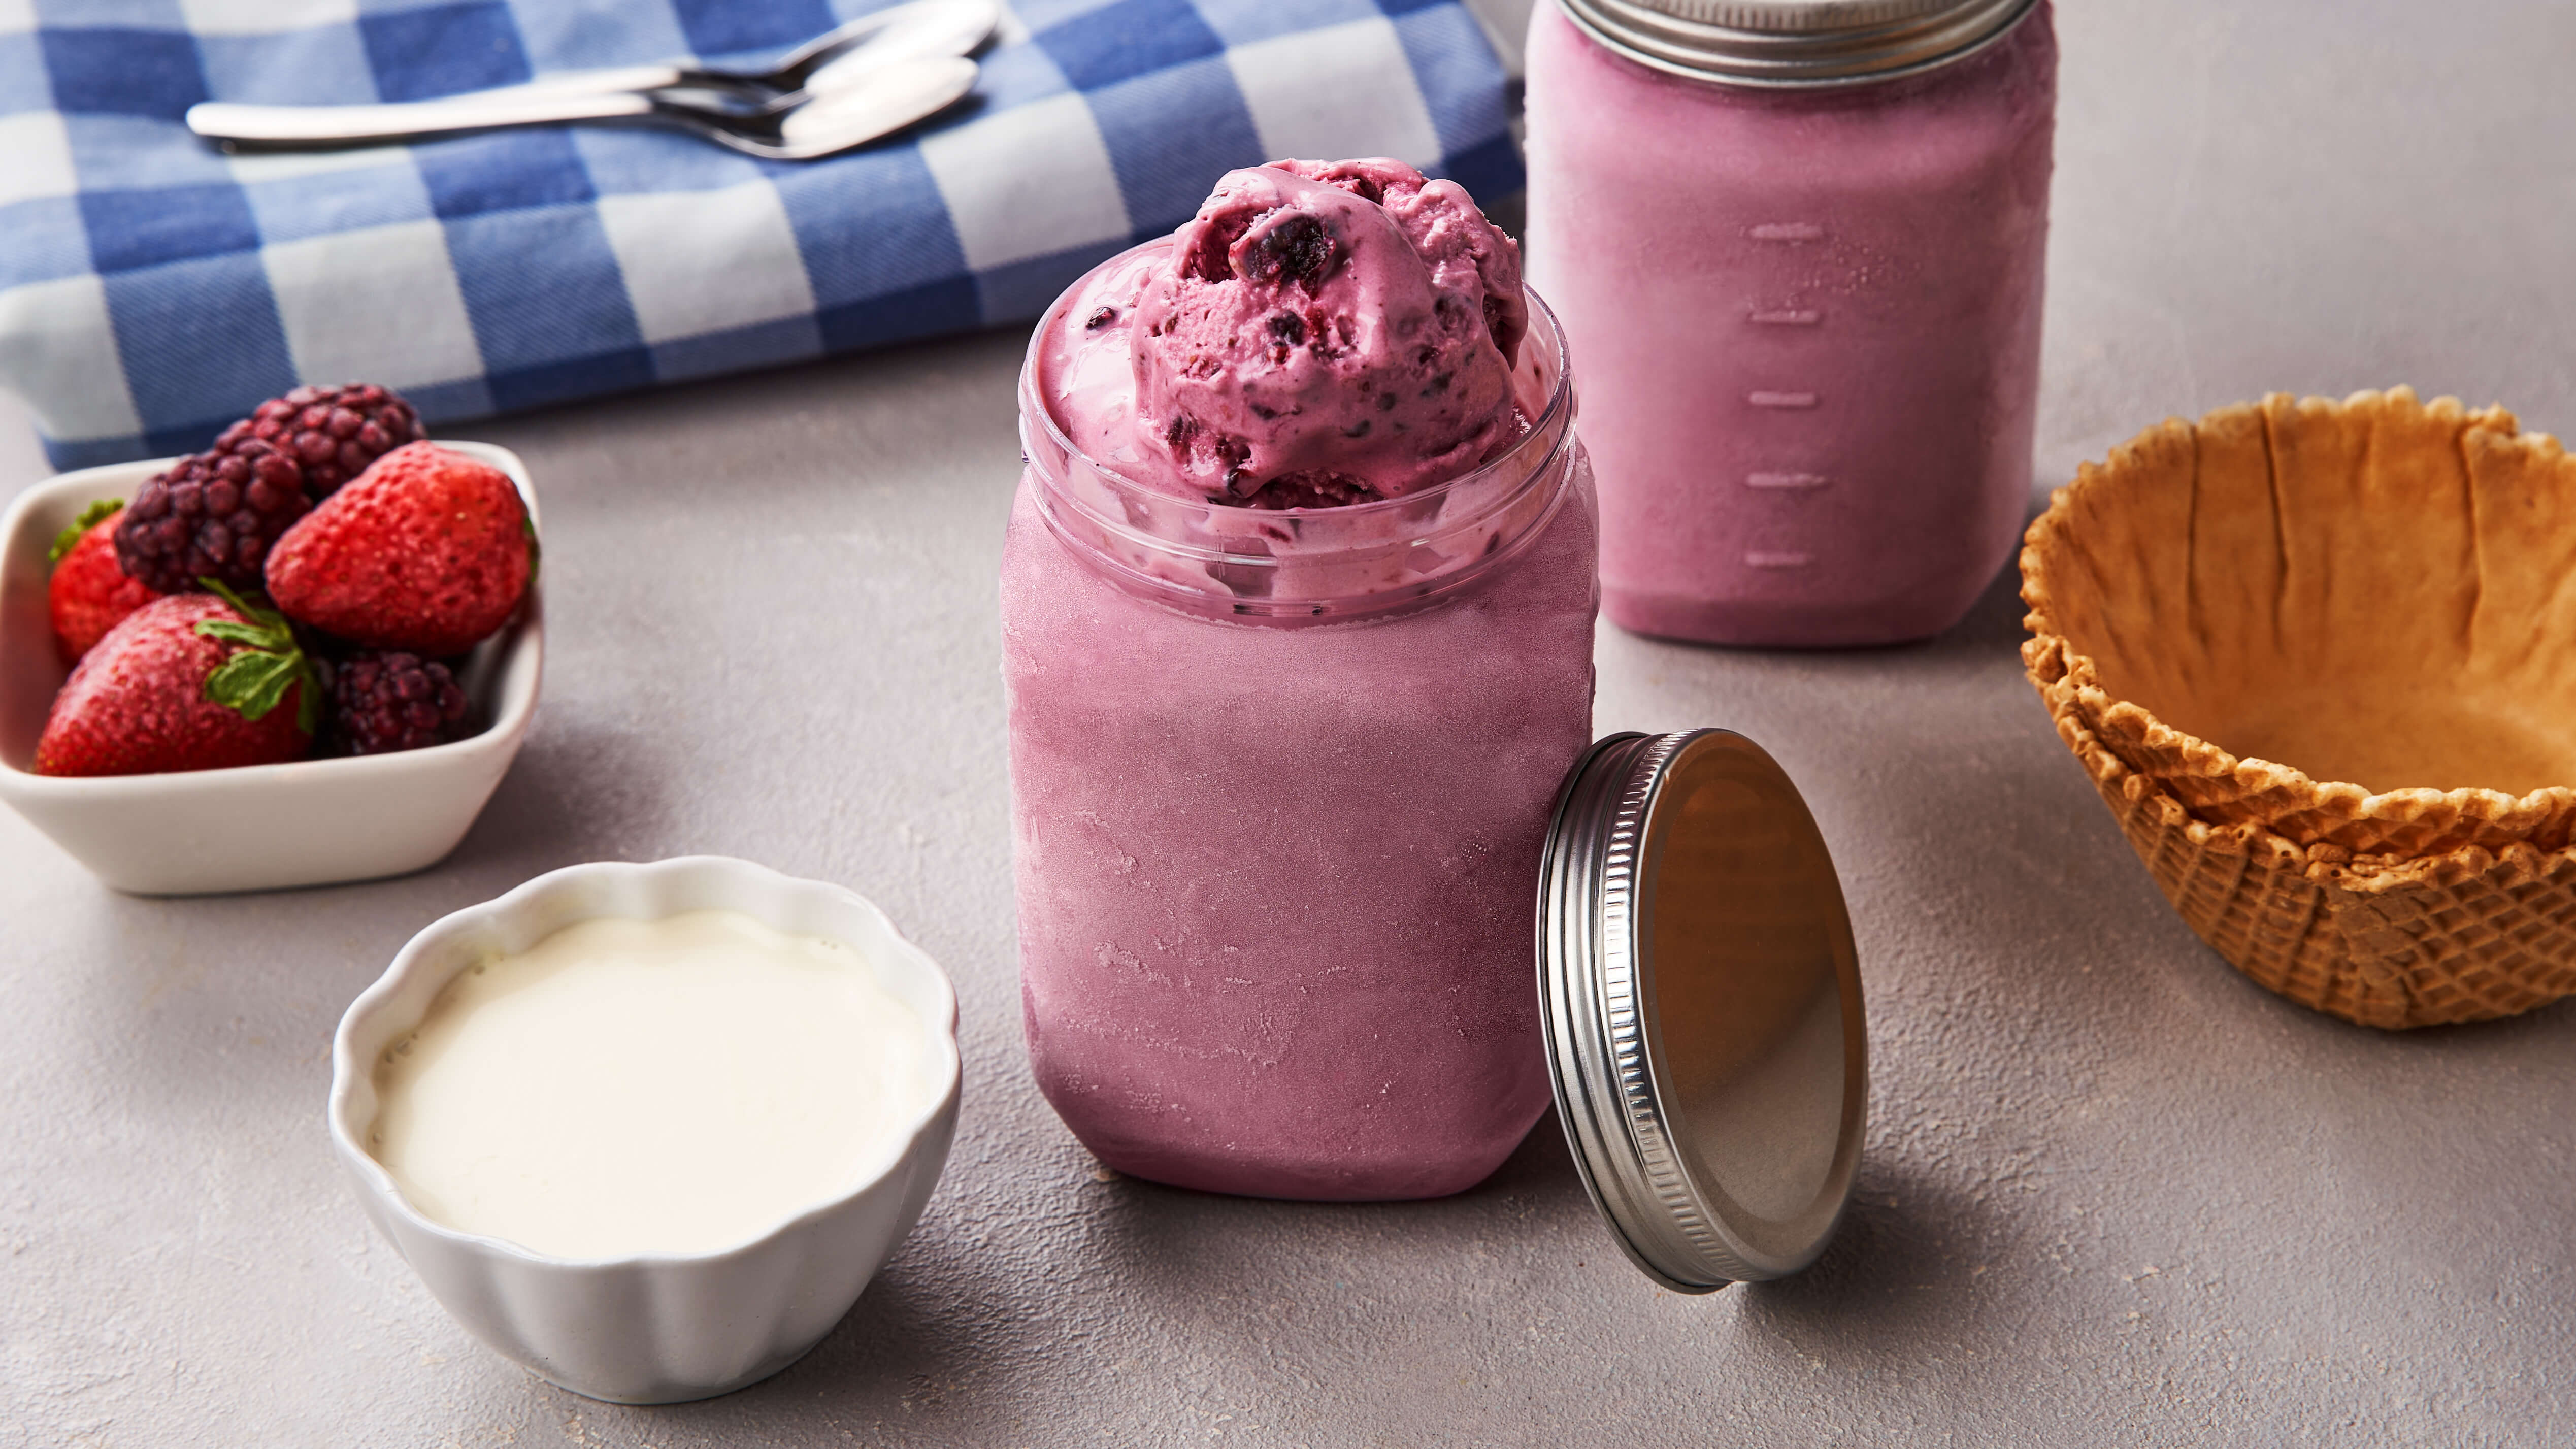 Mason jar filled with a berry ice cream